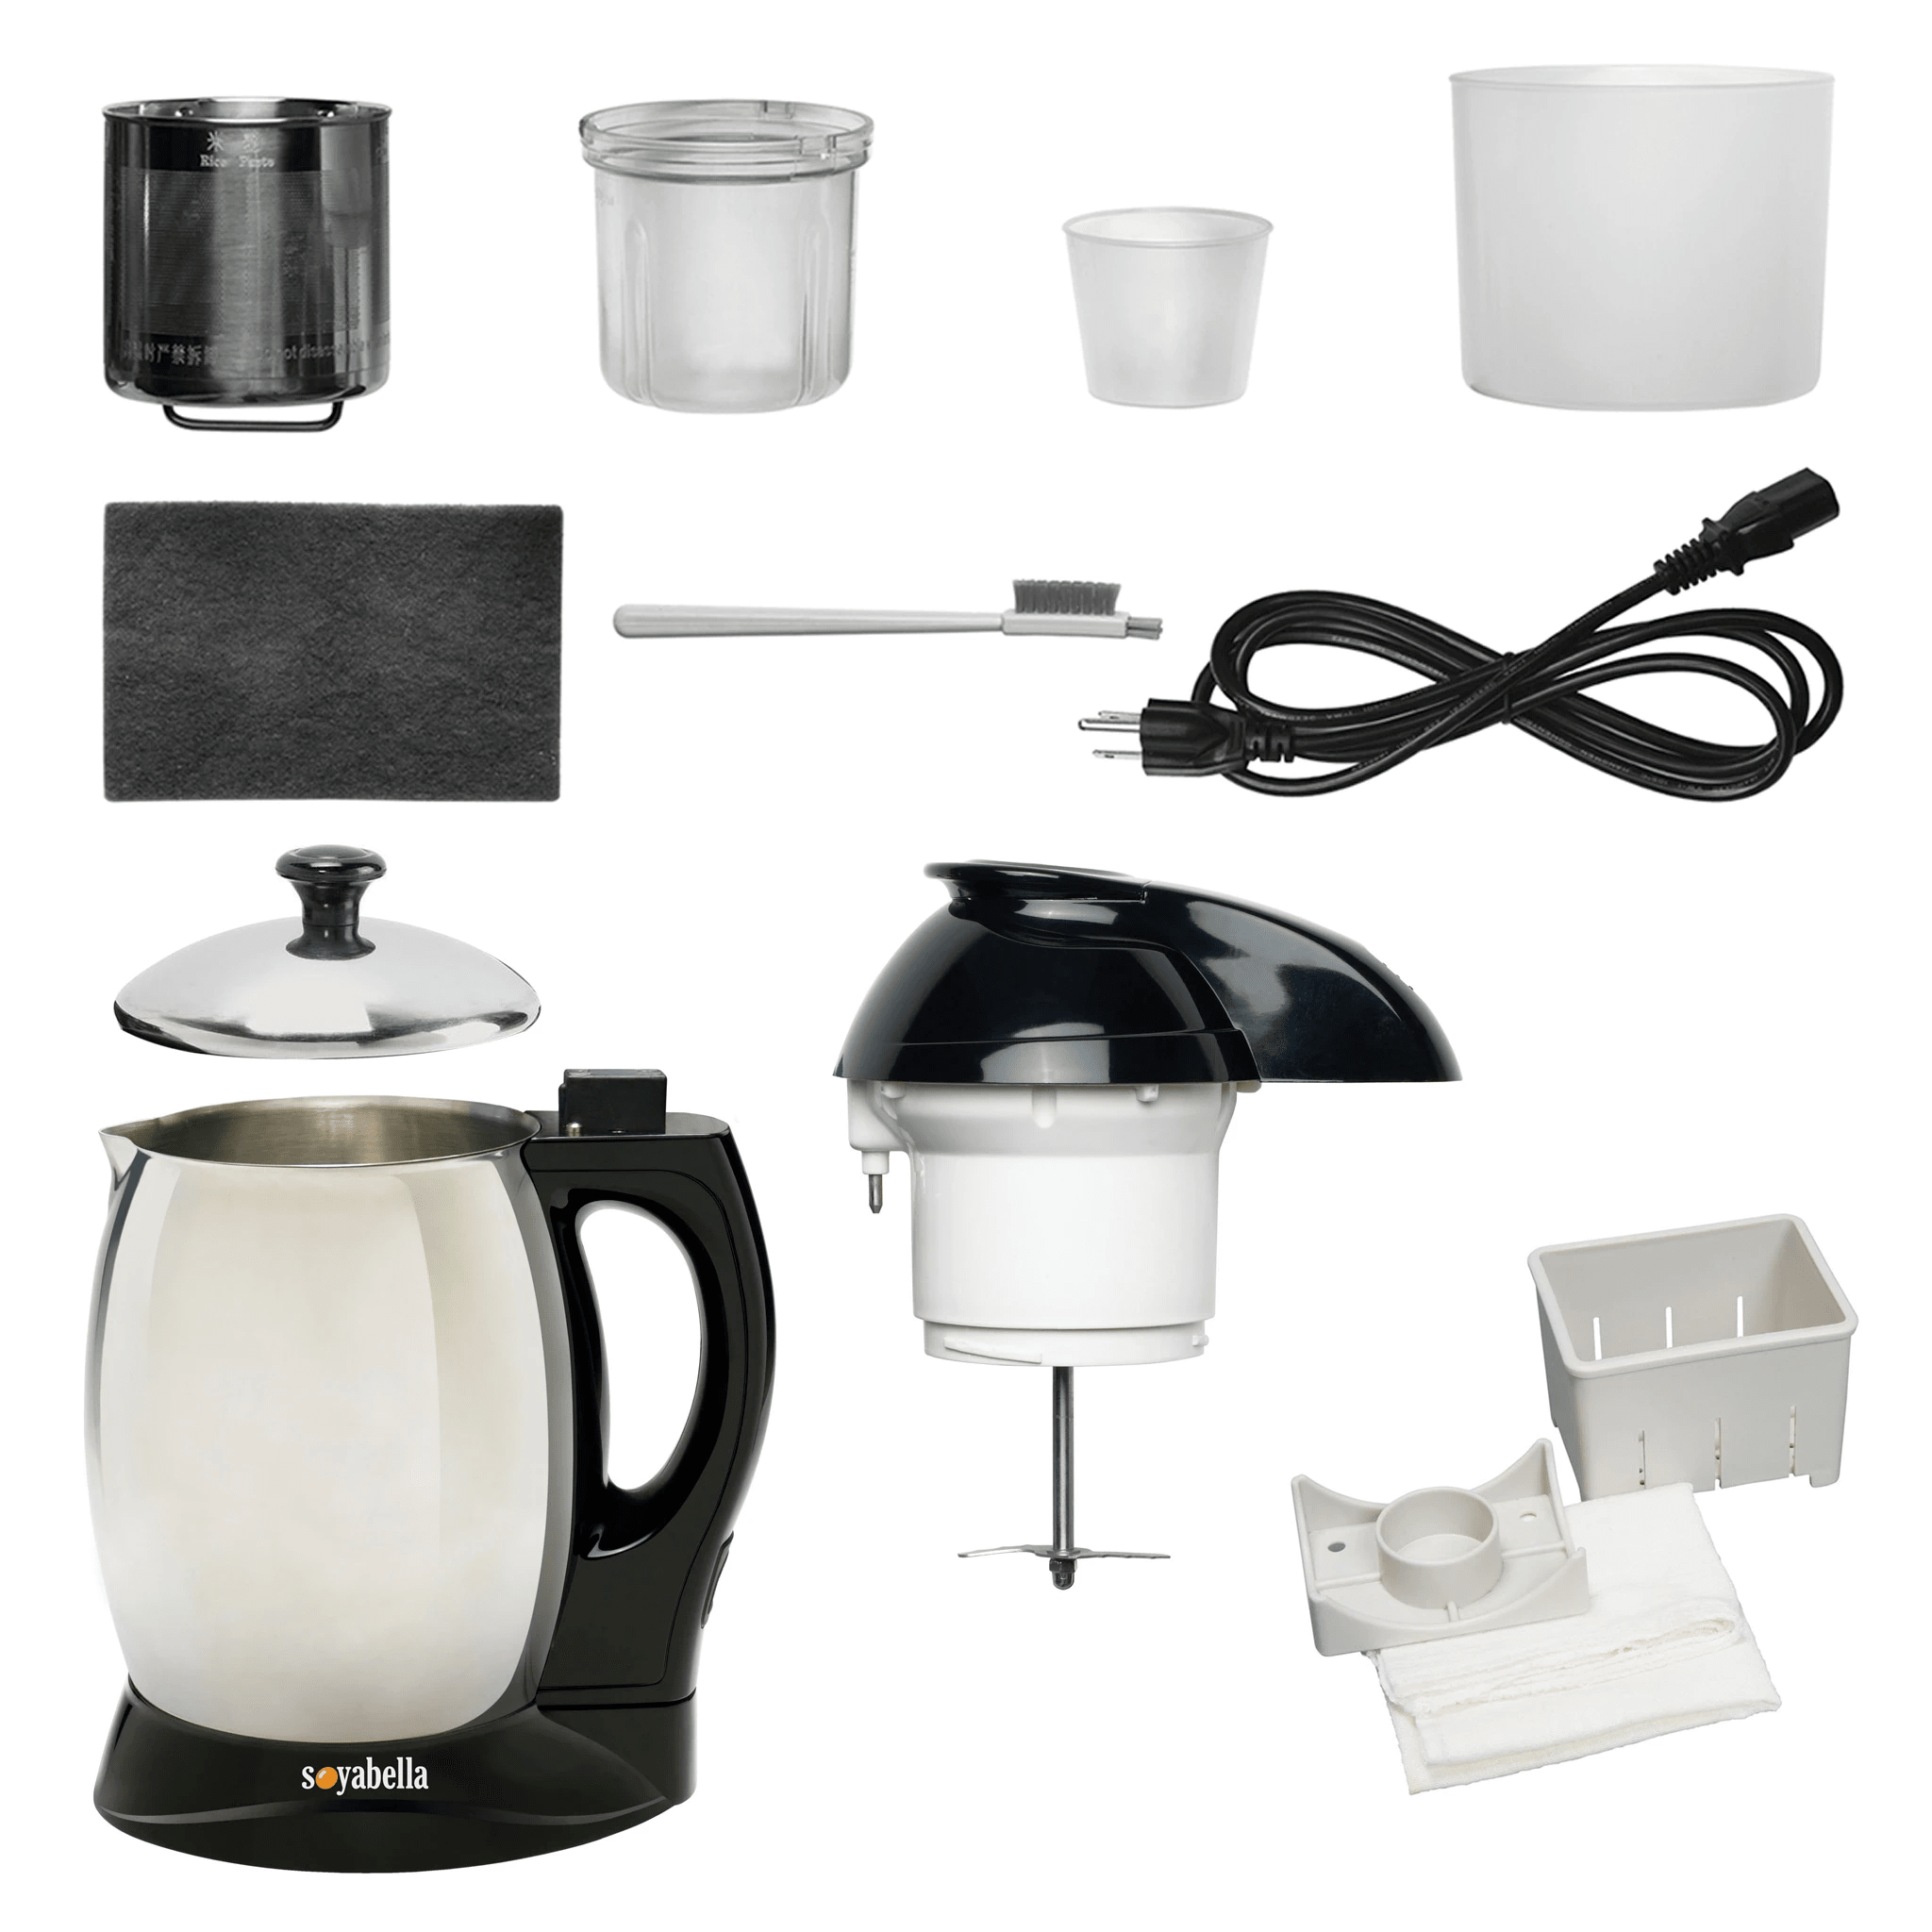 Tribest GKD-450 Raw Tea Kettle, Glass Electric Brewing System, 110V, White